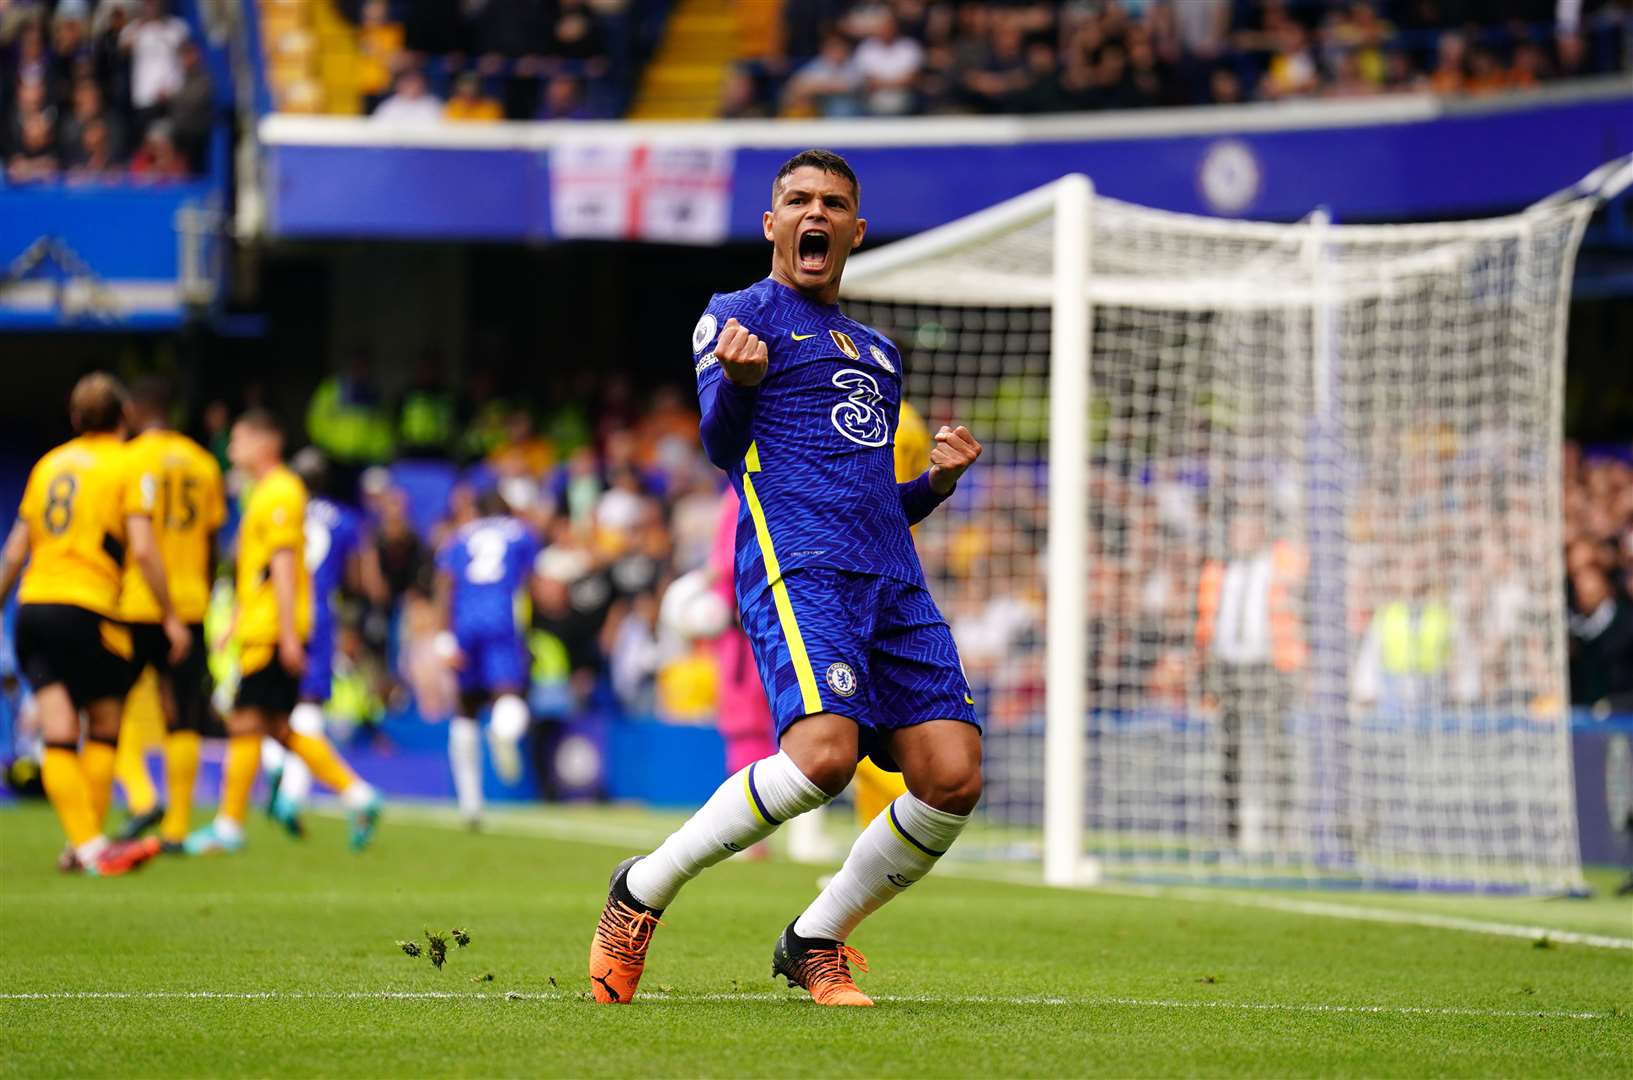 Thiago Silva’s goal for Chelsea against Wolverhampton Wanderers last season is about to be ruled offside by VAR (Adam Davy/PA)